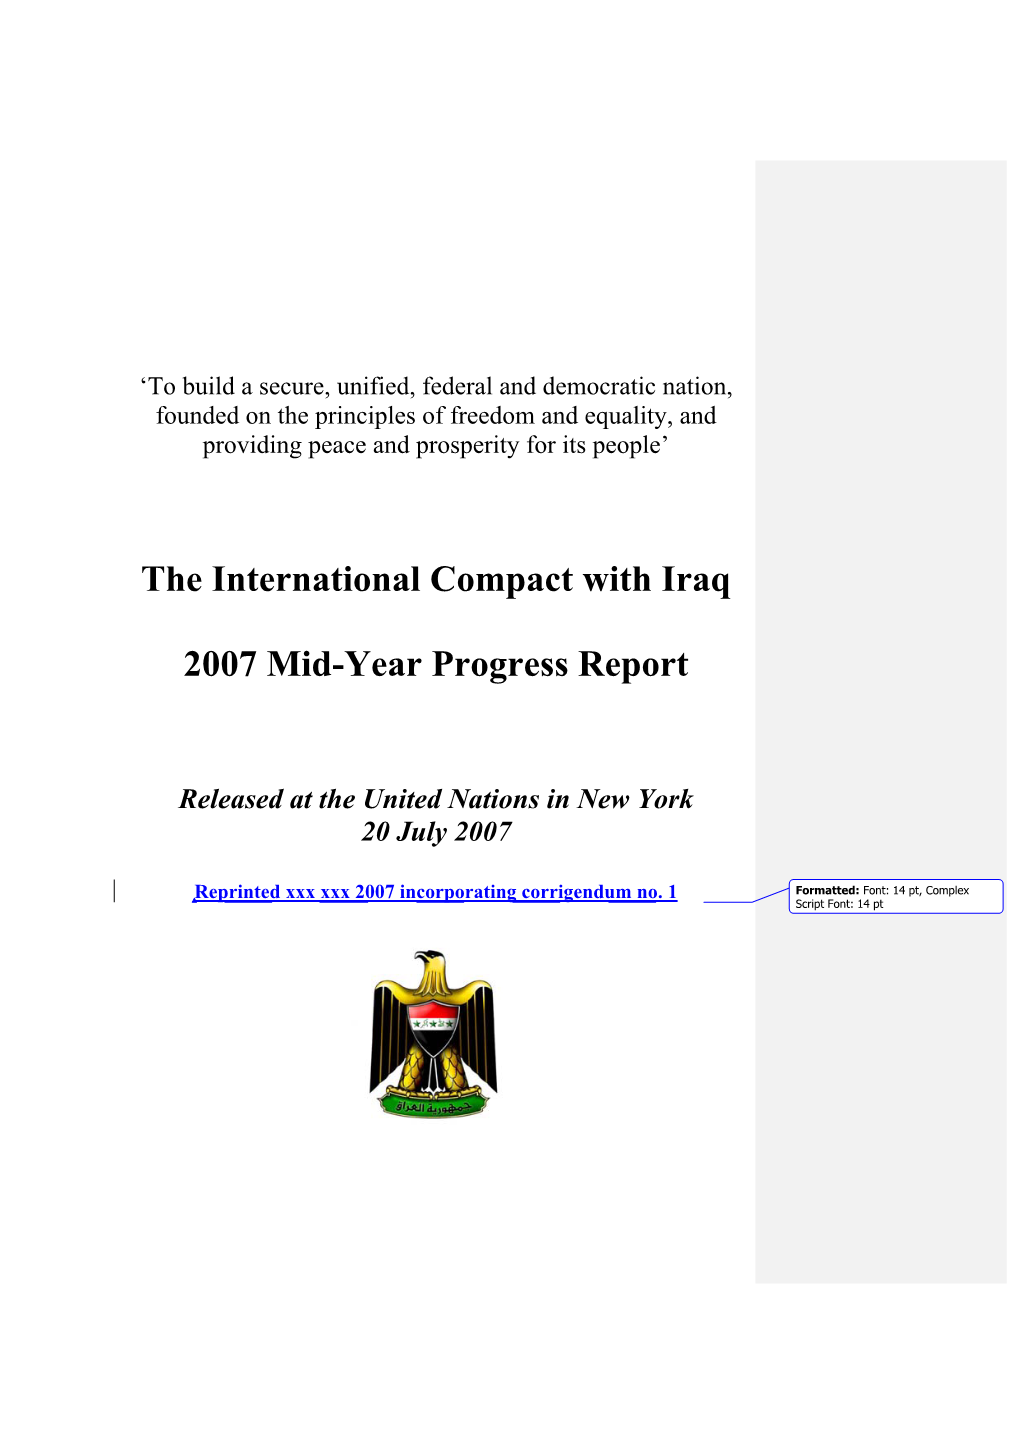 The International Compact with Iraq 2007 Mid-Year Progress Report